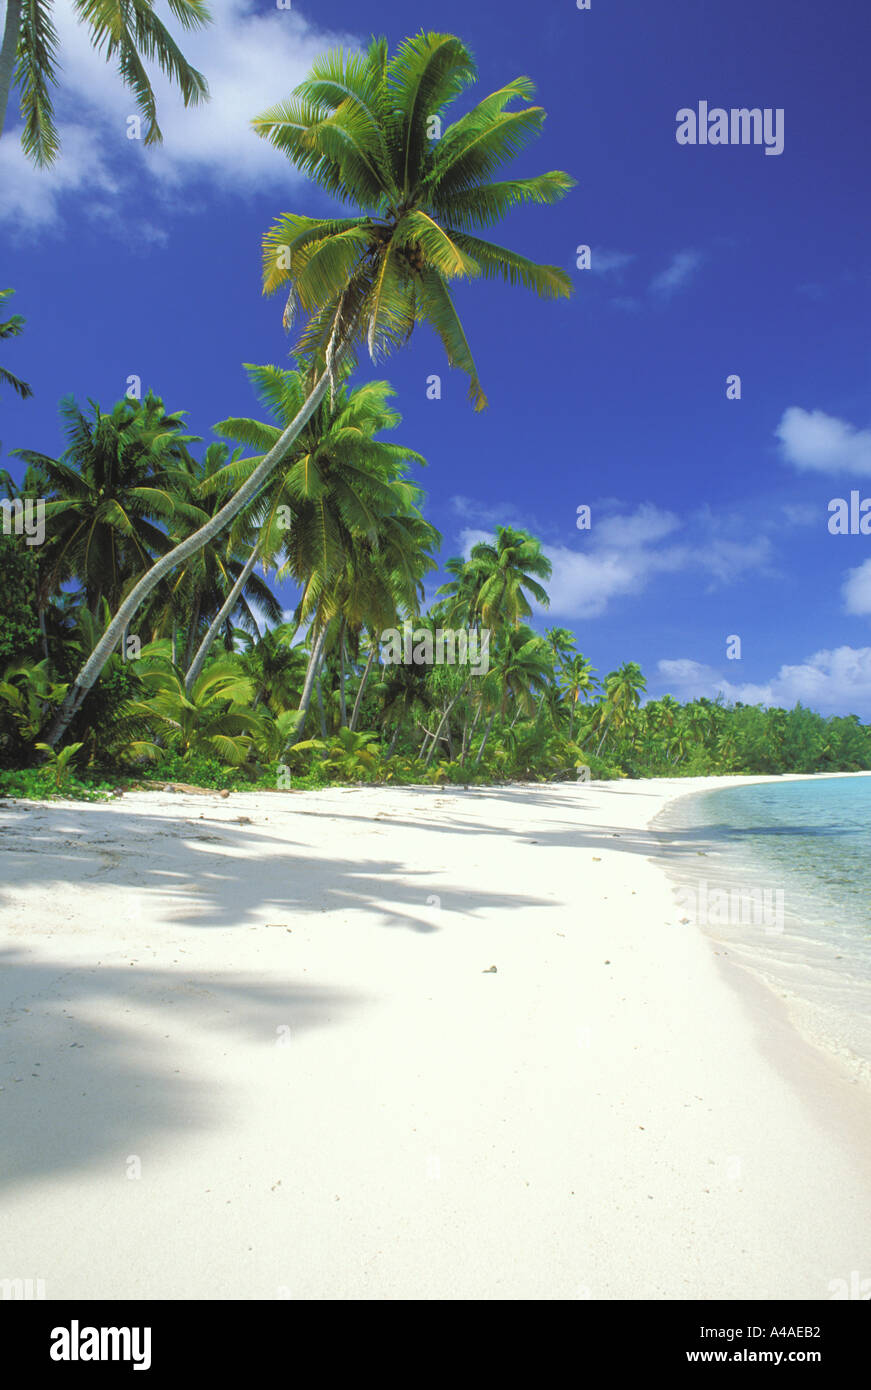 Tropical beach scene in the South Pacific Ocean Stock Photo